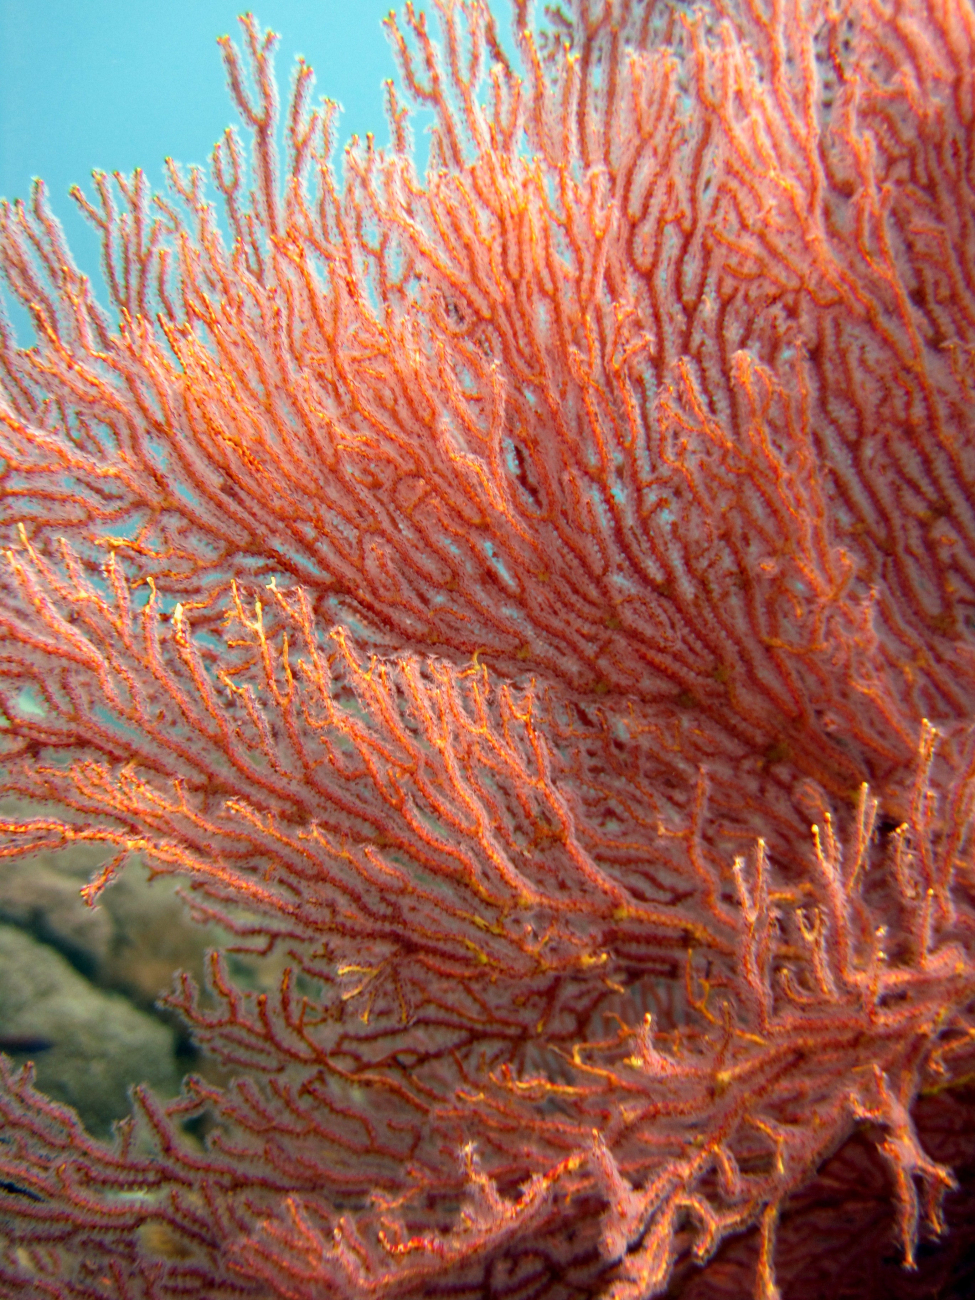 A red and yellow gorgonian coral